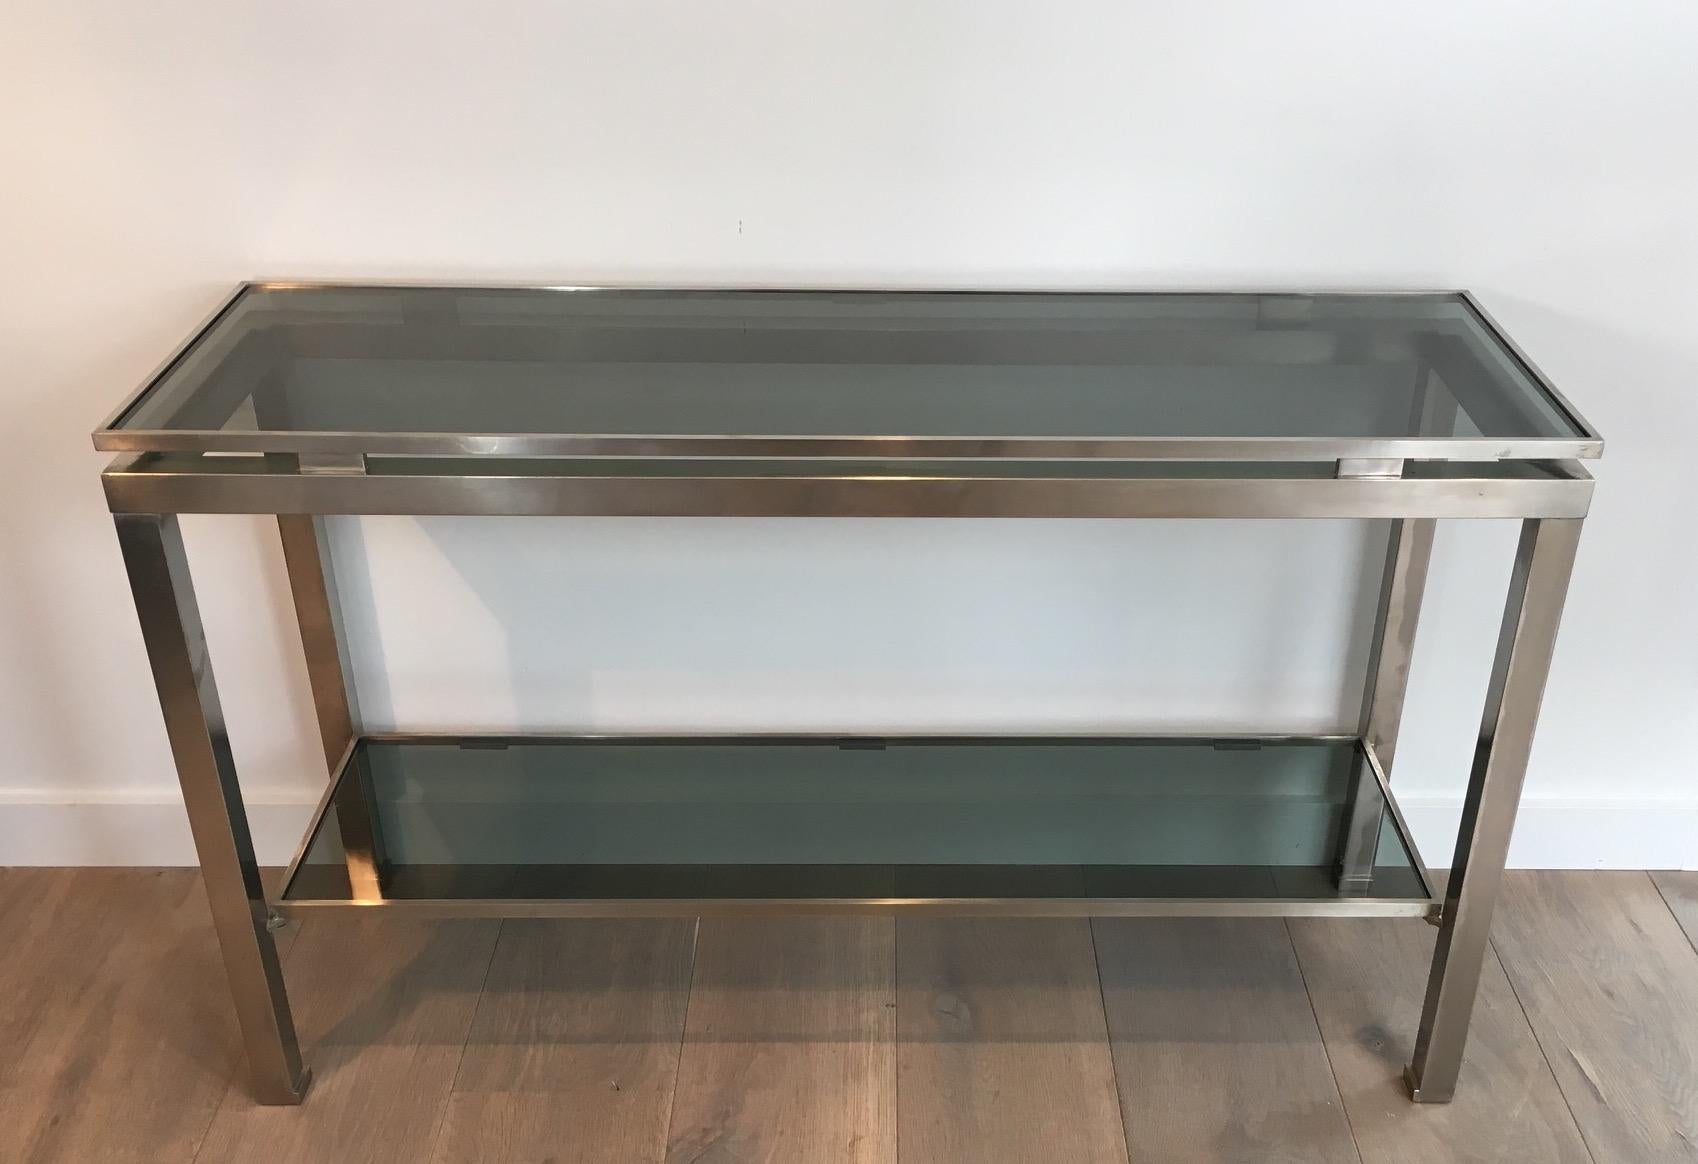 This very nice console table is made of brushed steel. It has nice blueish glass shelves. This model is by famous designer Guy Lefèvre for Maison Jansen. Circa 1970.